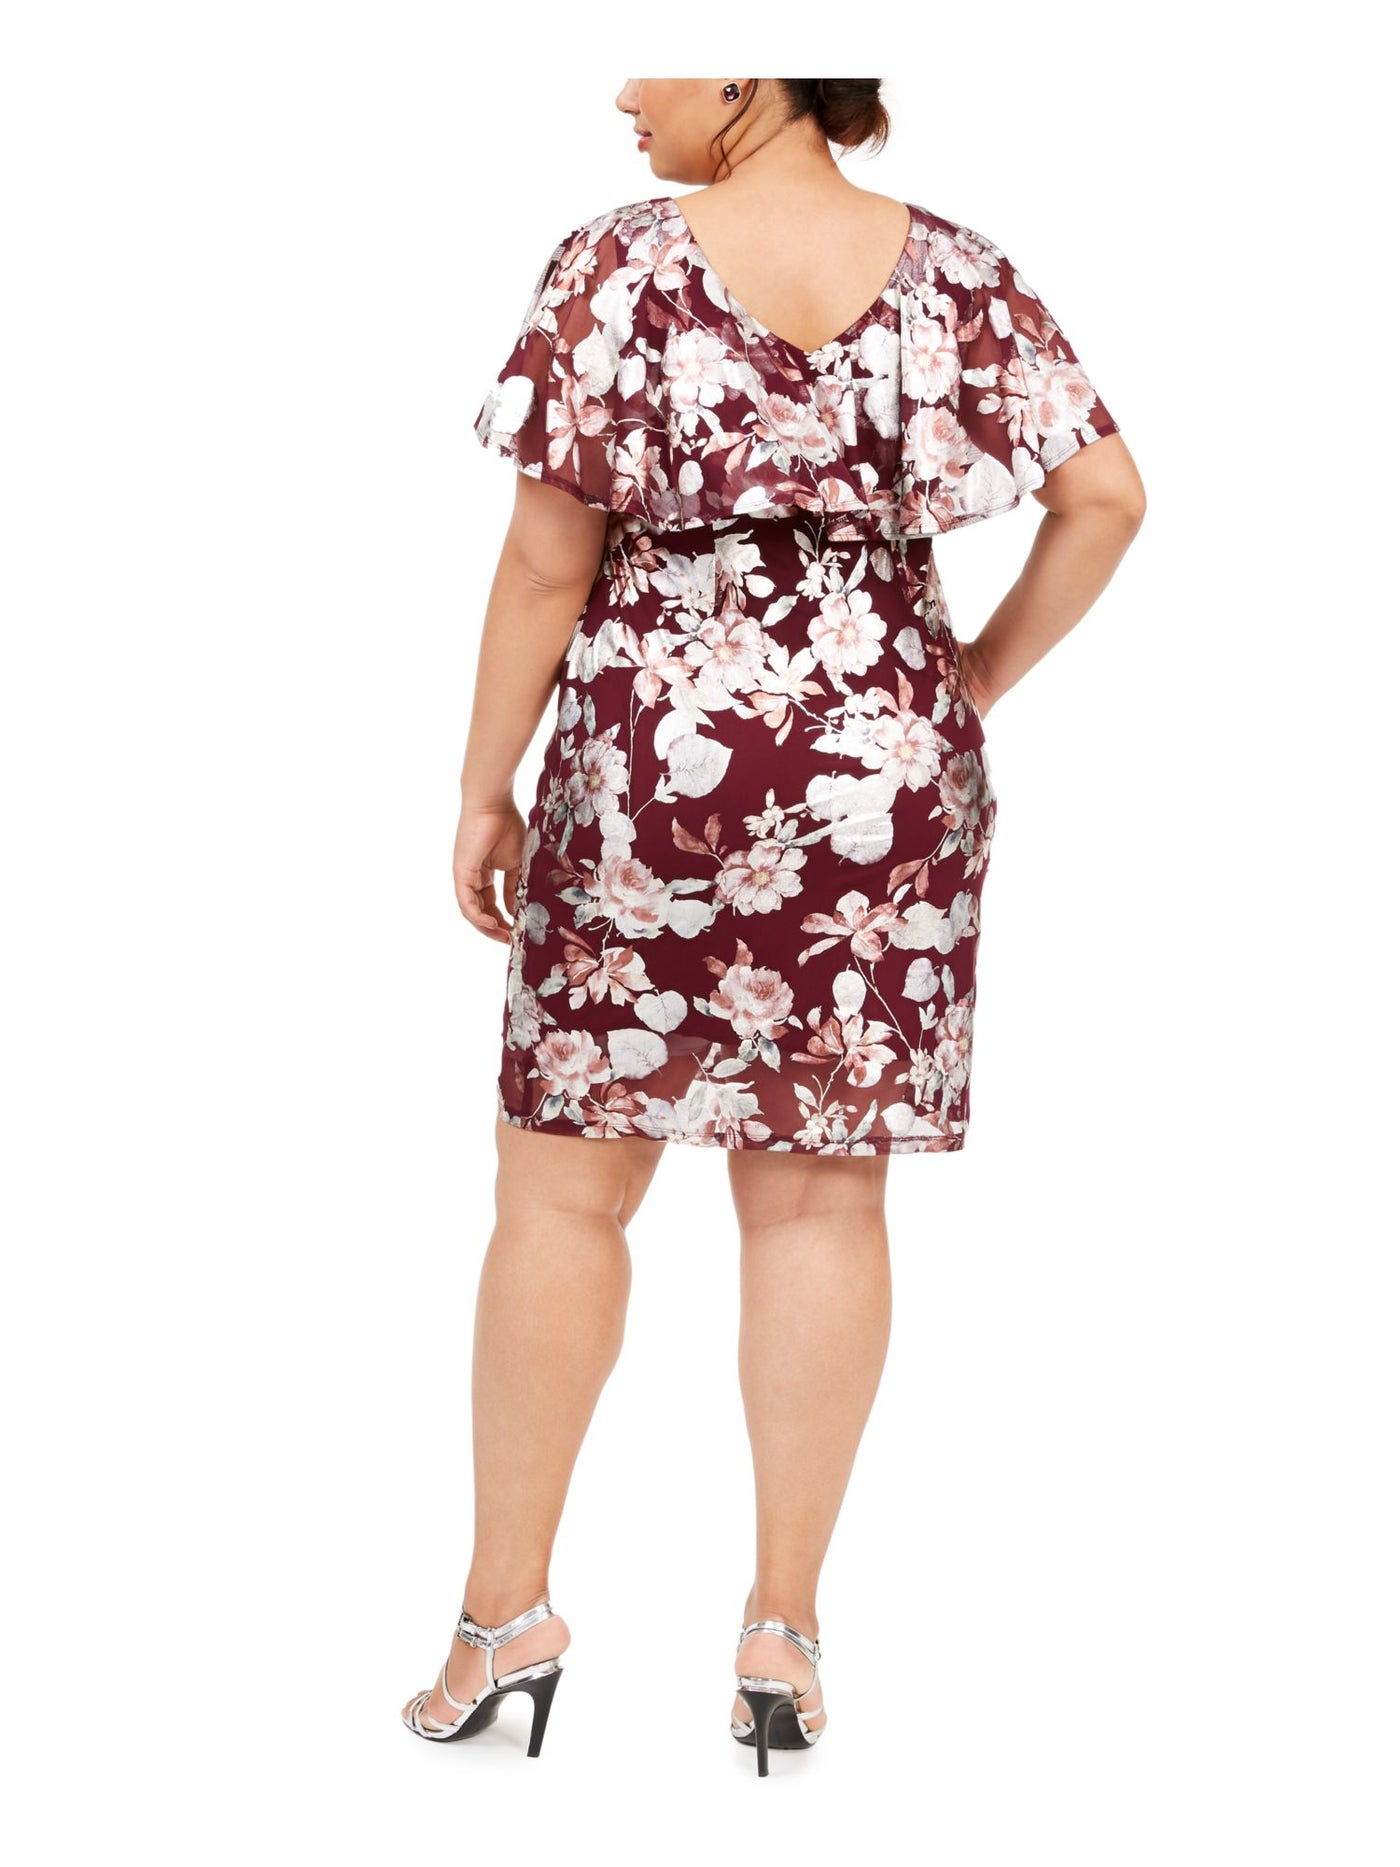 CONNECTED APPAREL Womens Burgundy Cape Overlay Floral Sleeveless V Neck Above The Knee Evening Sheath Dress Plus 20W